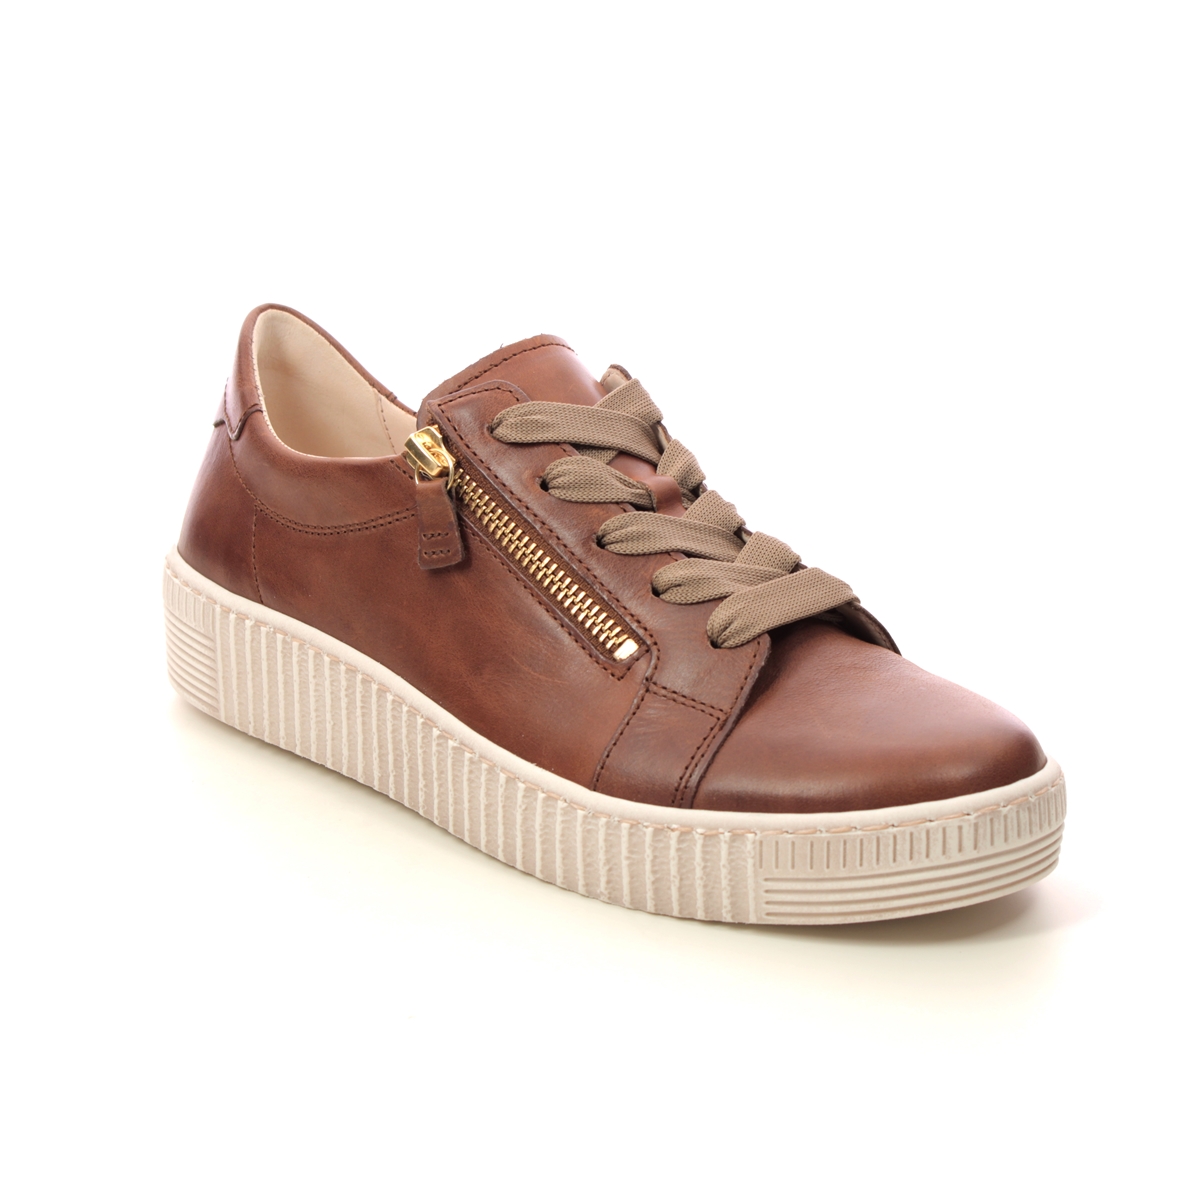 Gabor Wisdom Tan Leather Womens Trainers 93.334.24 In Size 6 In Plain Tan Leather  Womens Trainers In Soft Tan Leather Leather